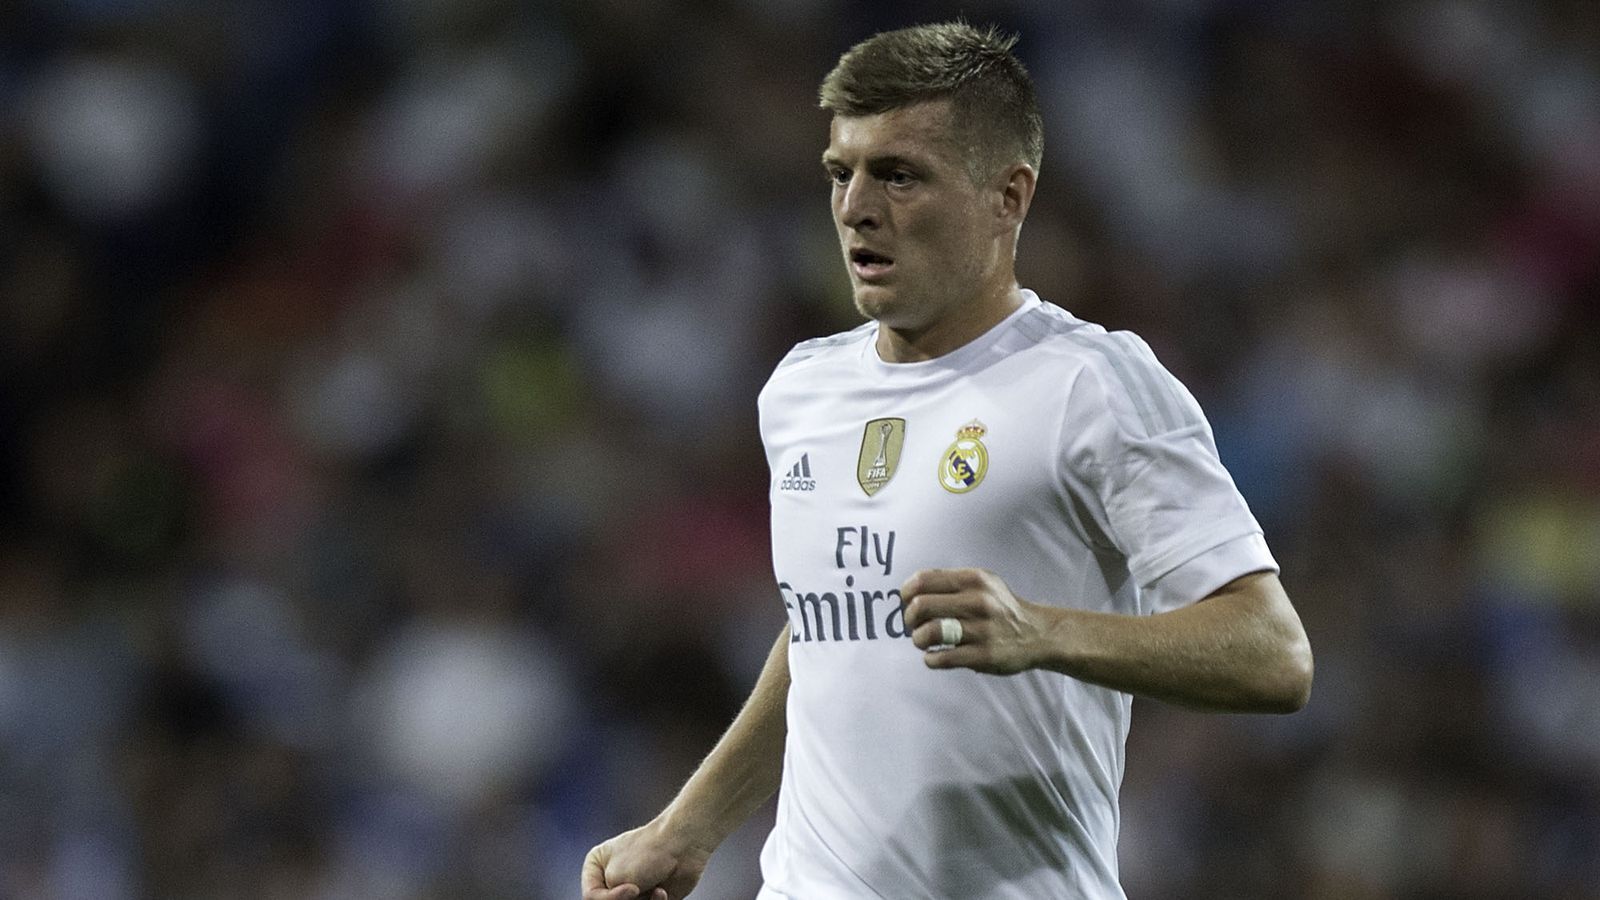 Real Madrid midfielder worried about players who publicly shared their sexual orientation.